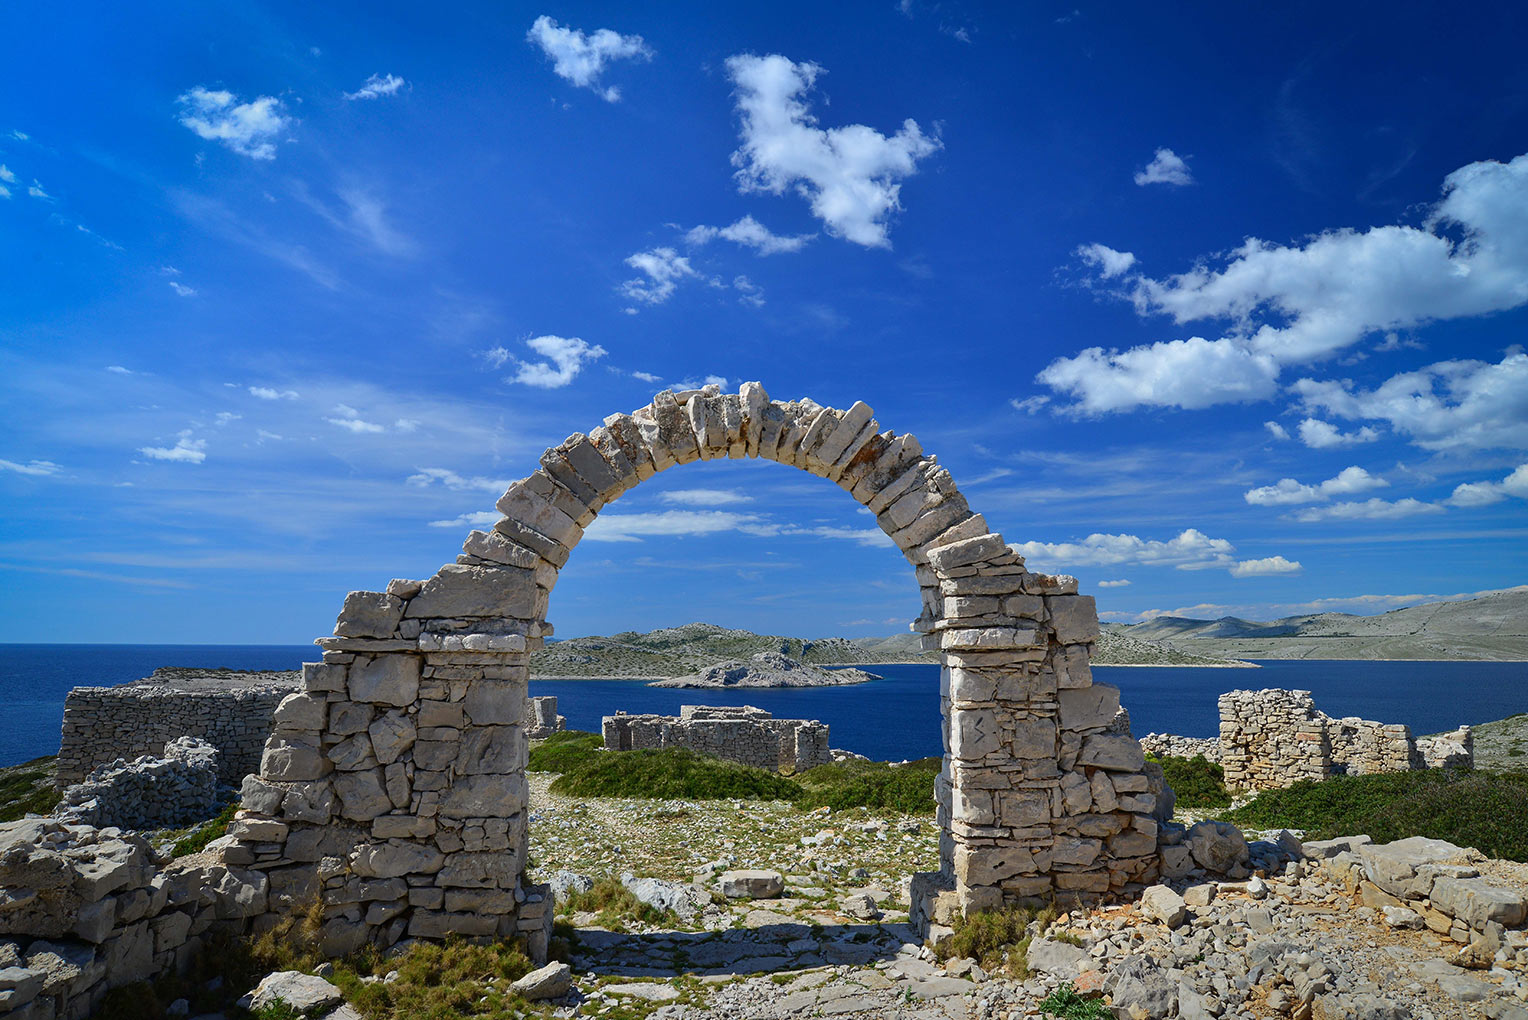 Amazing view from the top of the Mana island (Kornati Islands National Park)